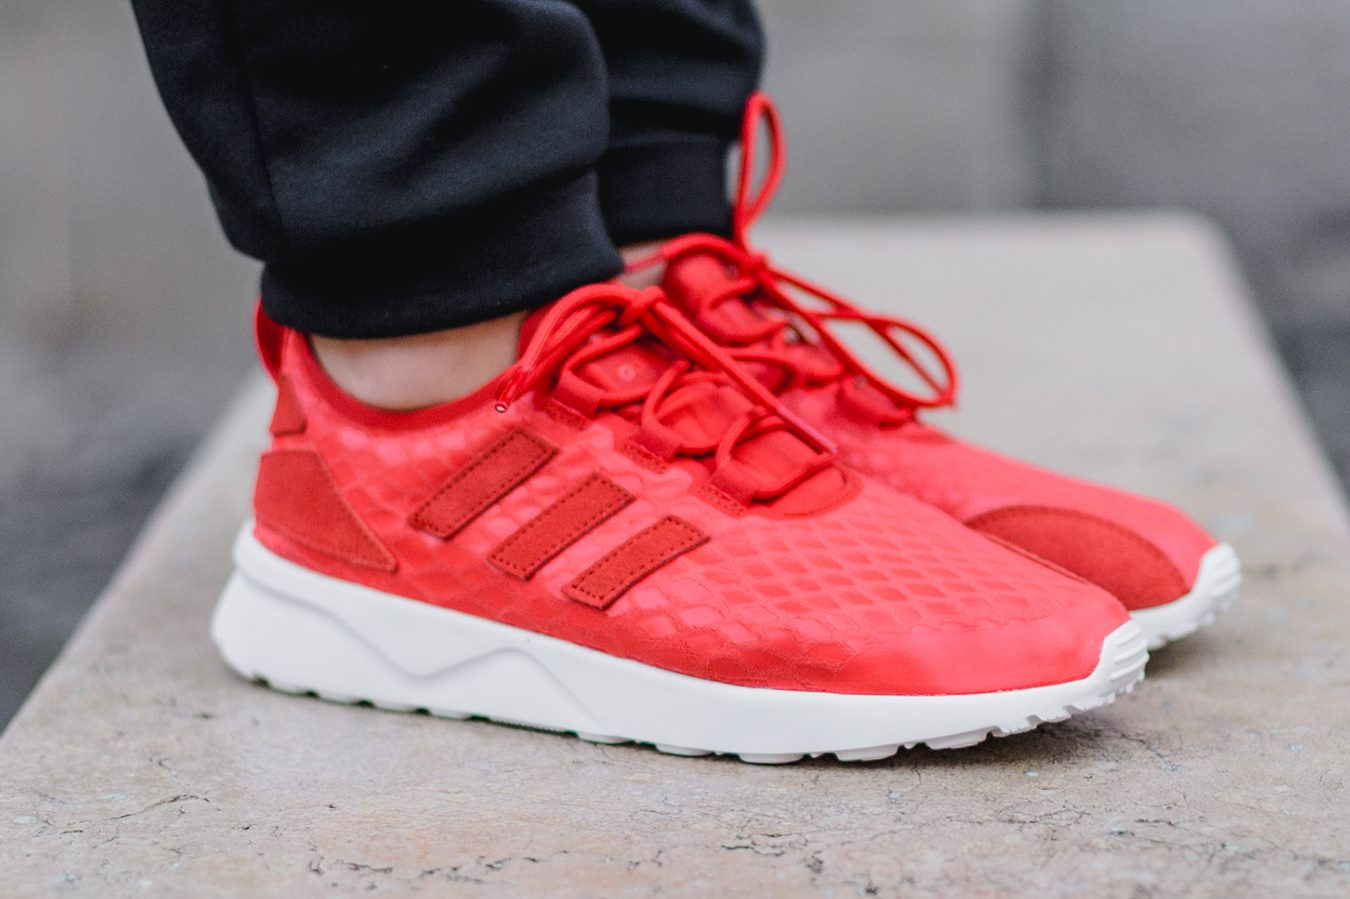 adidas ZX Flux Adv Verve Lush Red Release Date